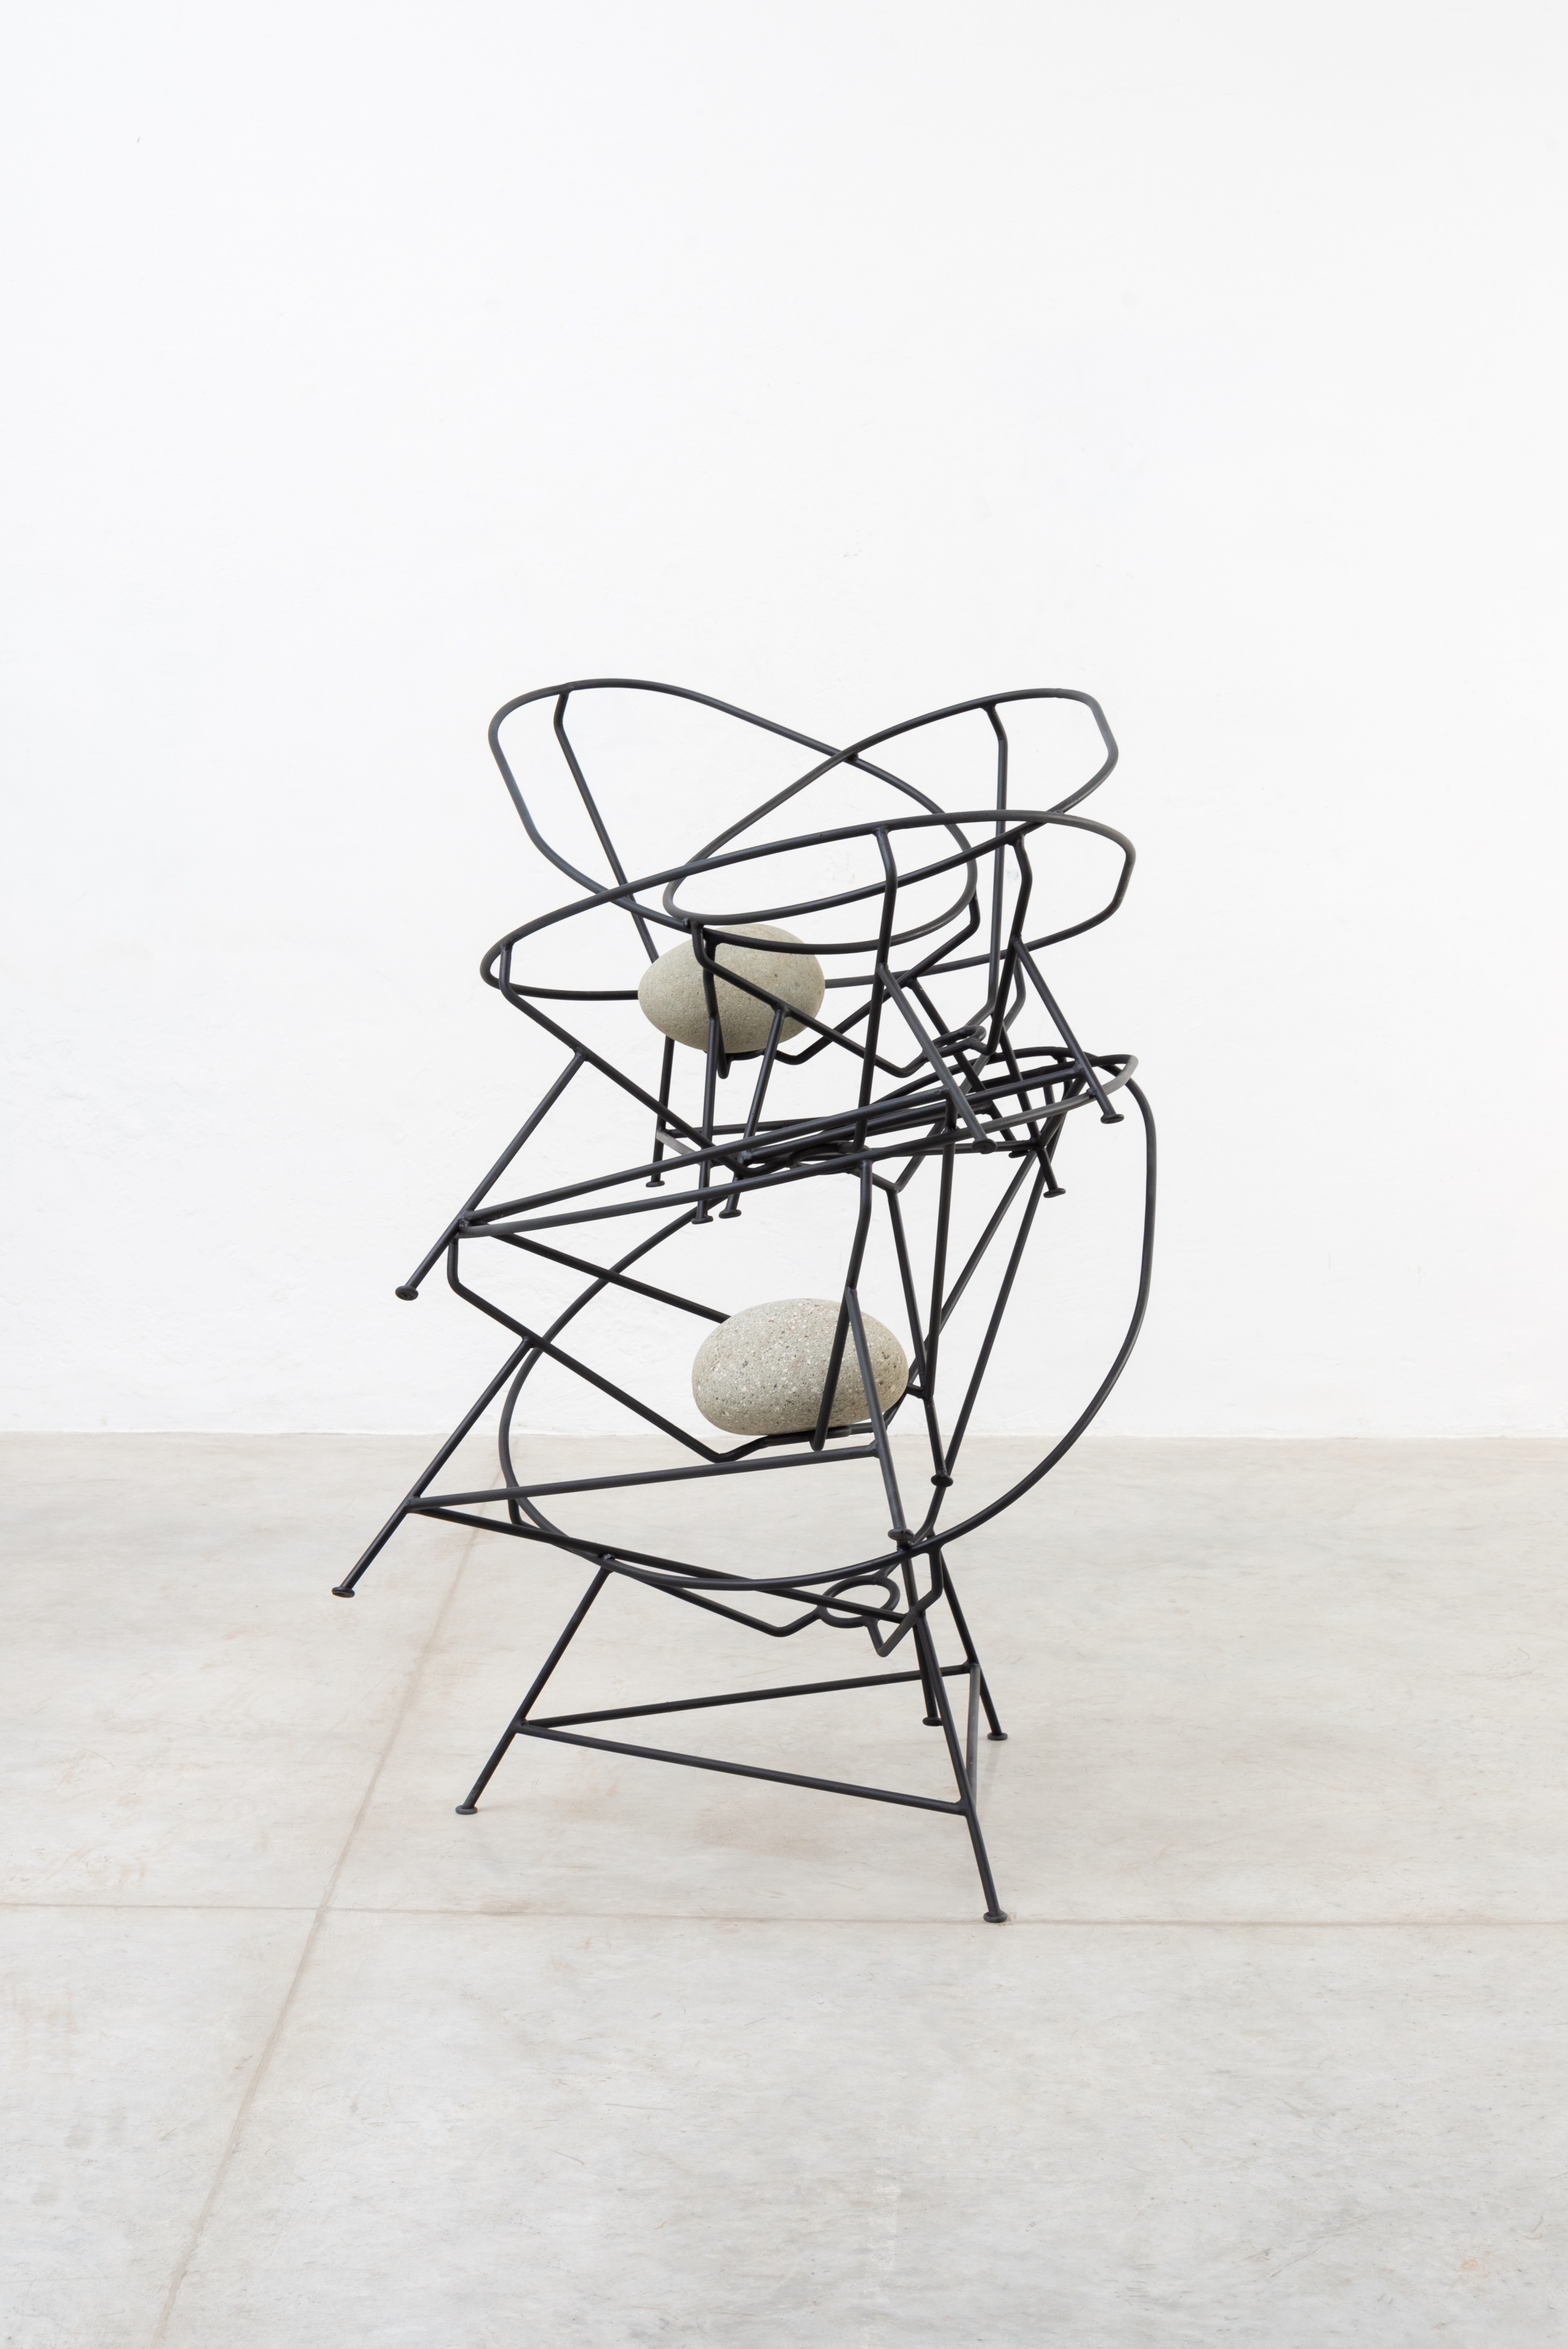 
Acapulco chair stack, 2021
metal, enamel paint and boulders
53 3/4 x 33 7/16 x 54 1/2 inches (136.5 x 85 x 138.5 cm), JDa-21.12
&amp;nbsp;